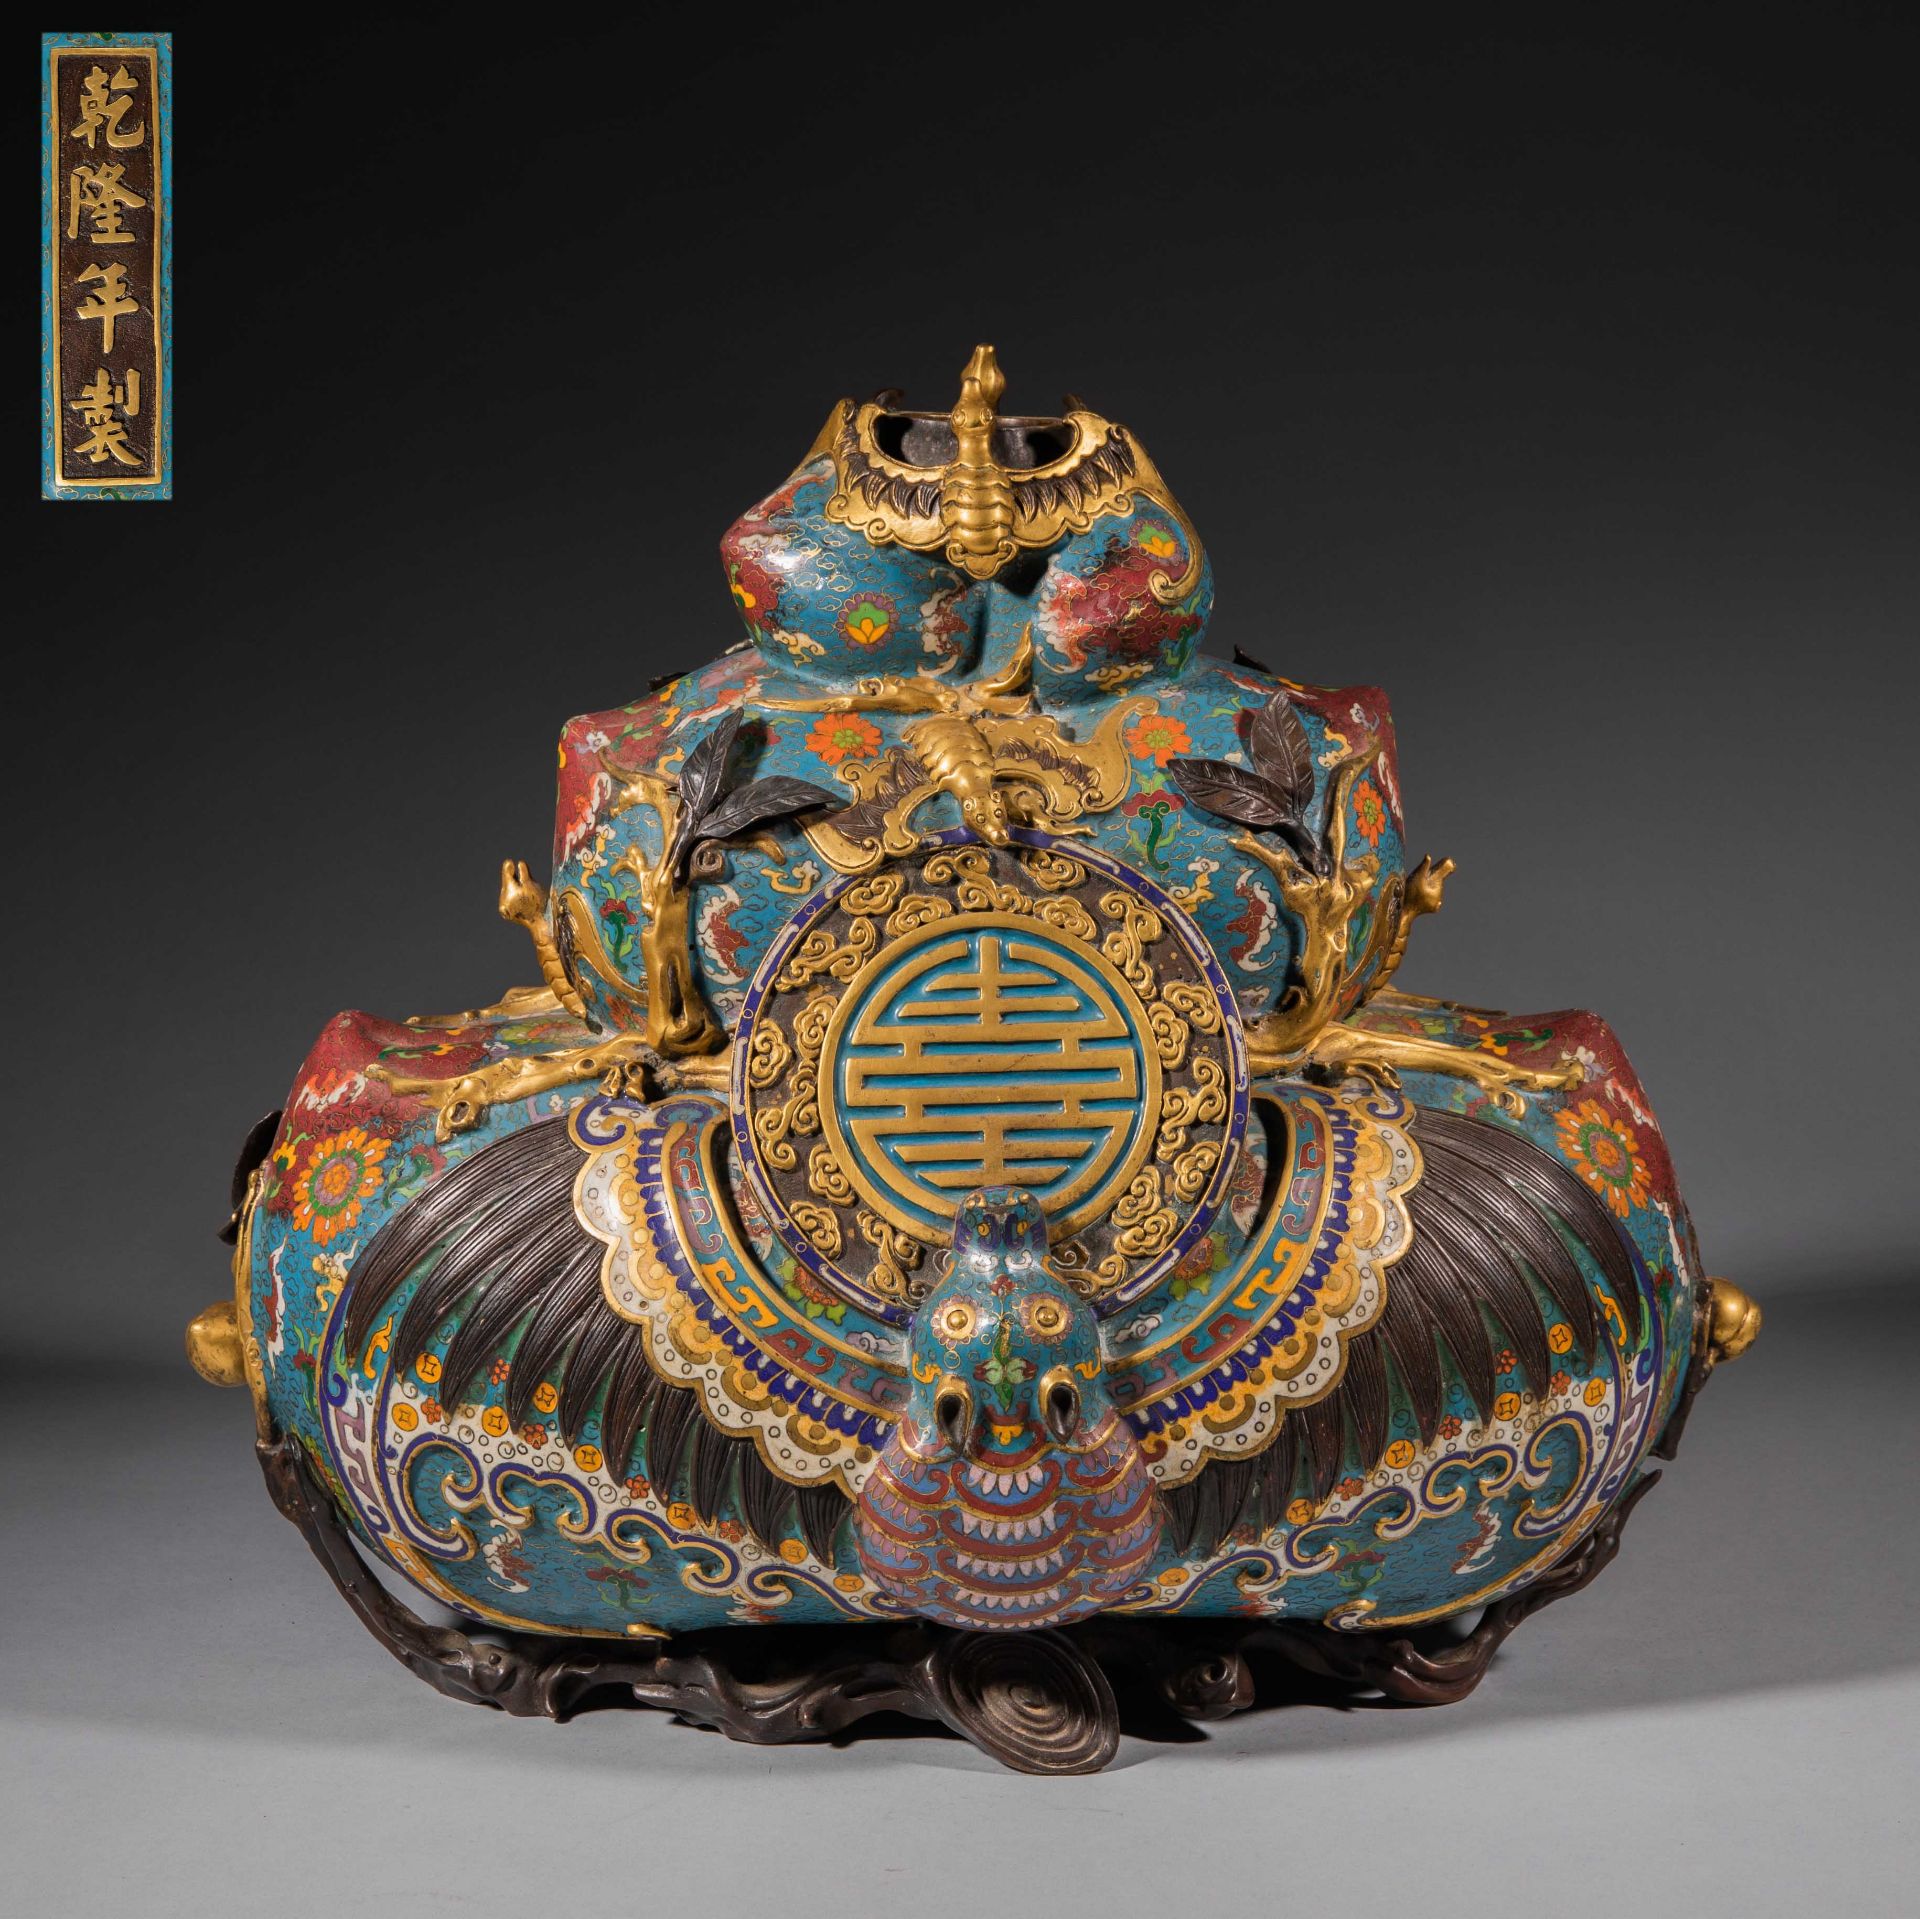 A Qianlong-marked Cloisonne Vase, Qing Dynasty, China